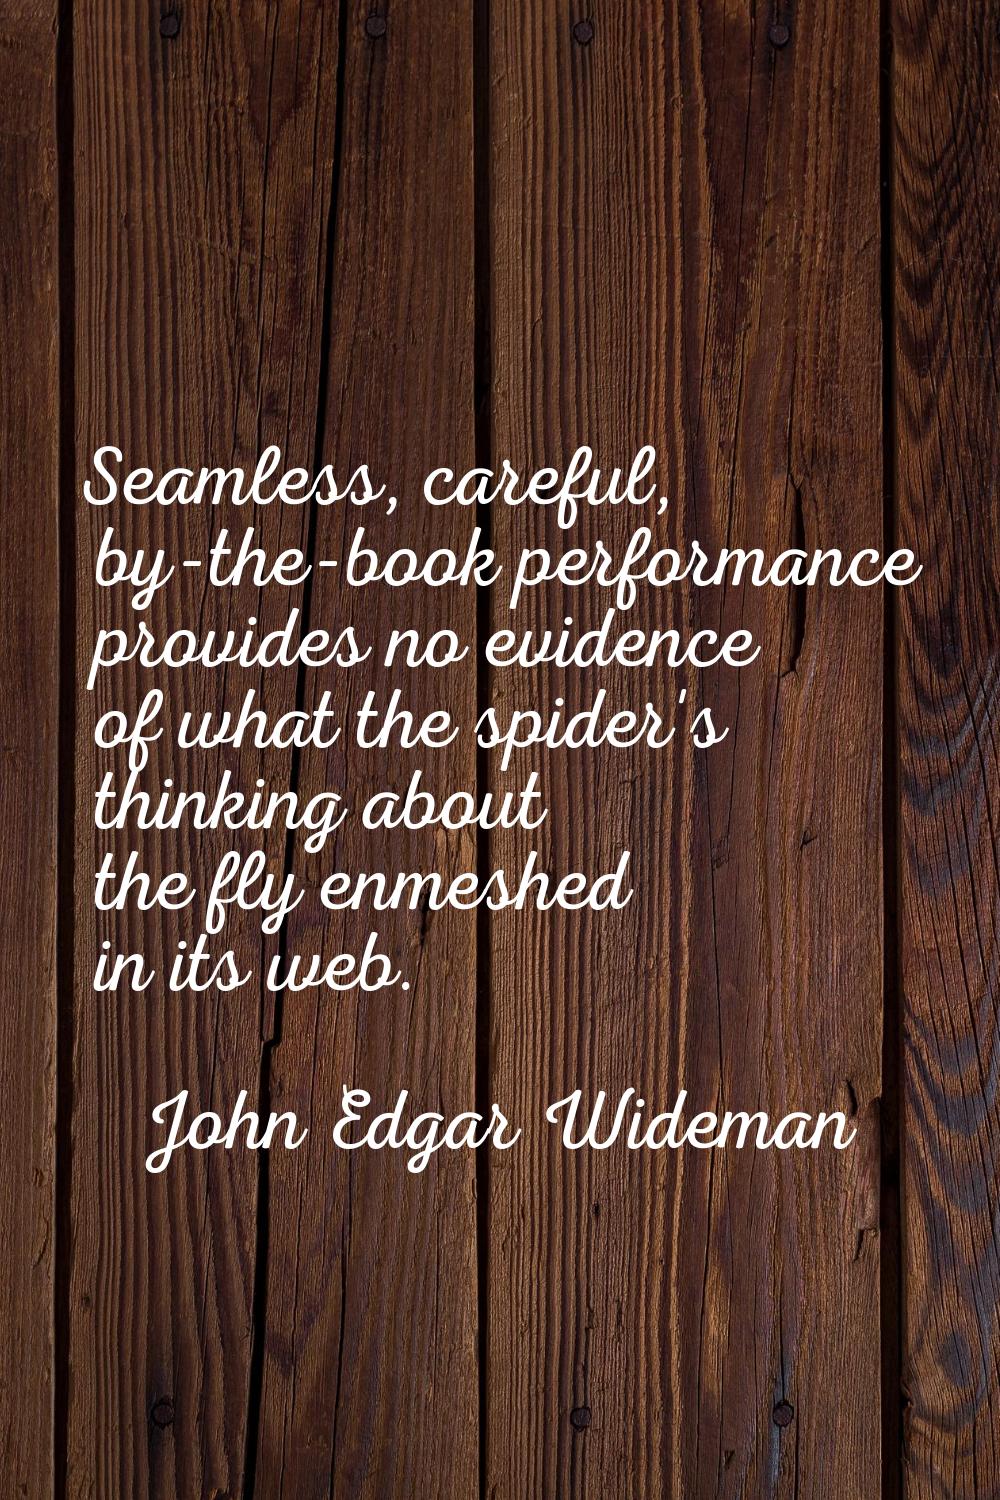 Seamless, careful, by-the-book performance provides no evidence of what the spider's thinking about